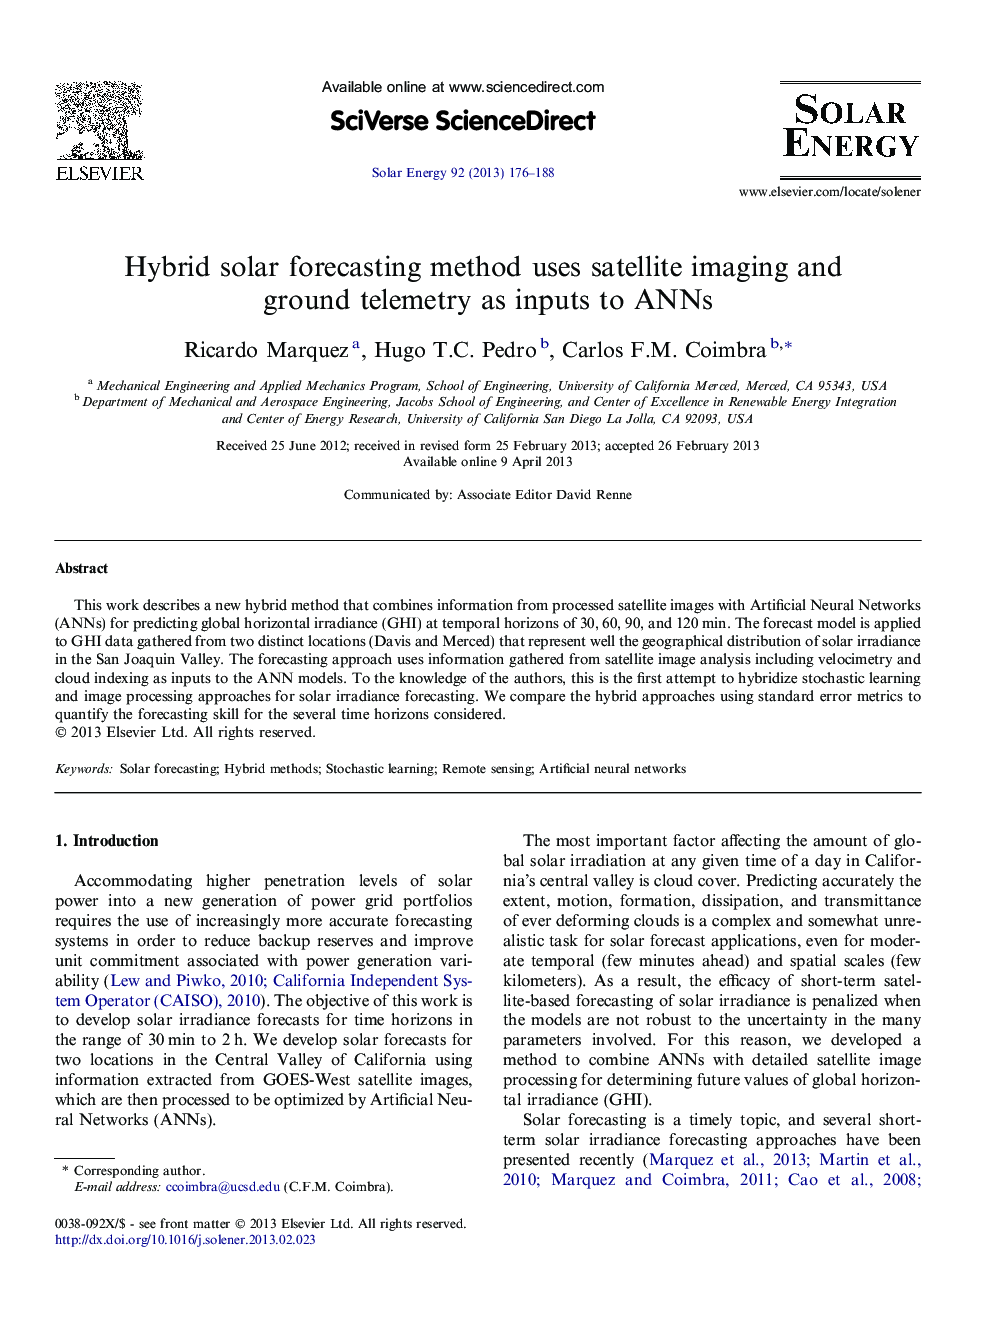 Hybrid solar forecasting method uses satellite imaging and ground telemetry as inputs to ANNs